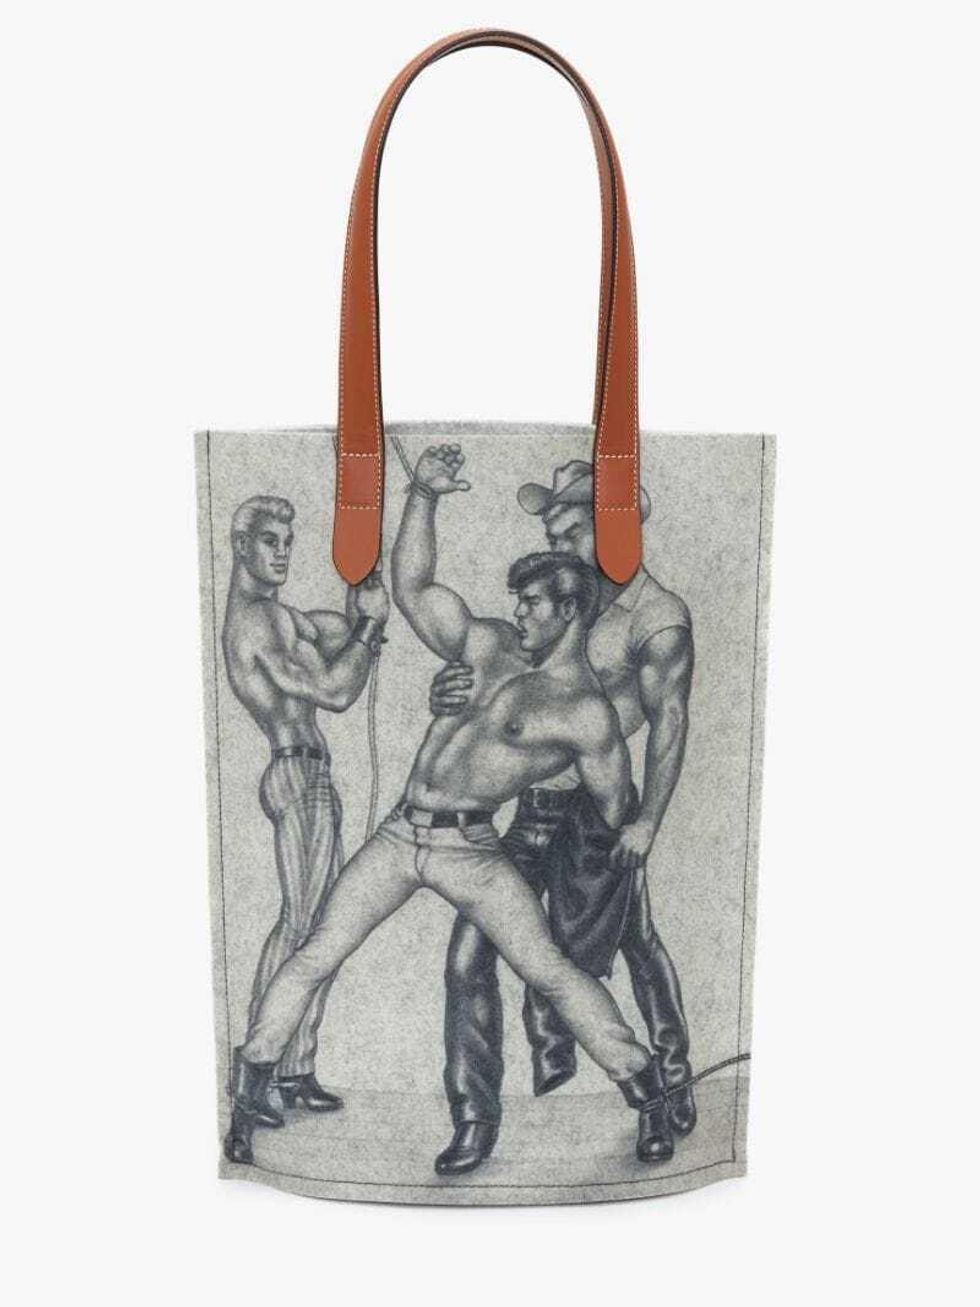 JW Anderson for Tom of Finland